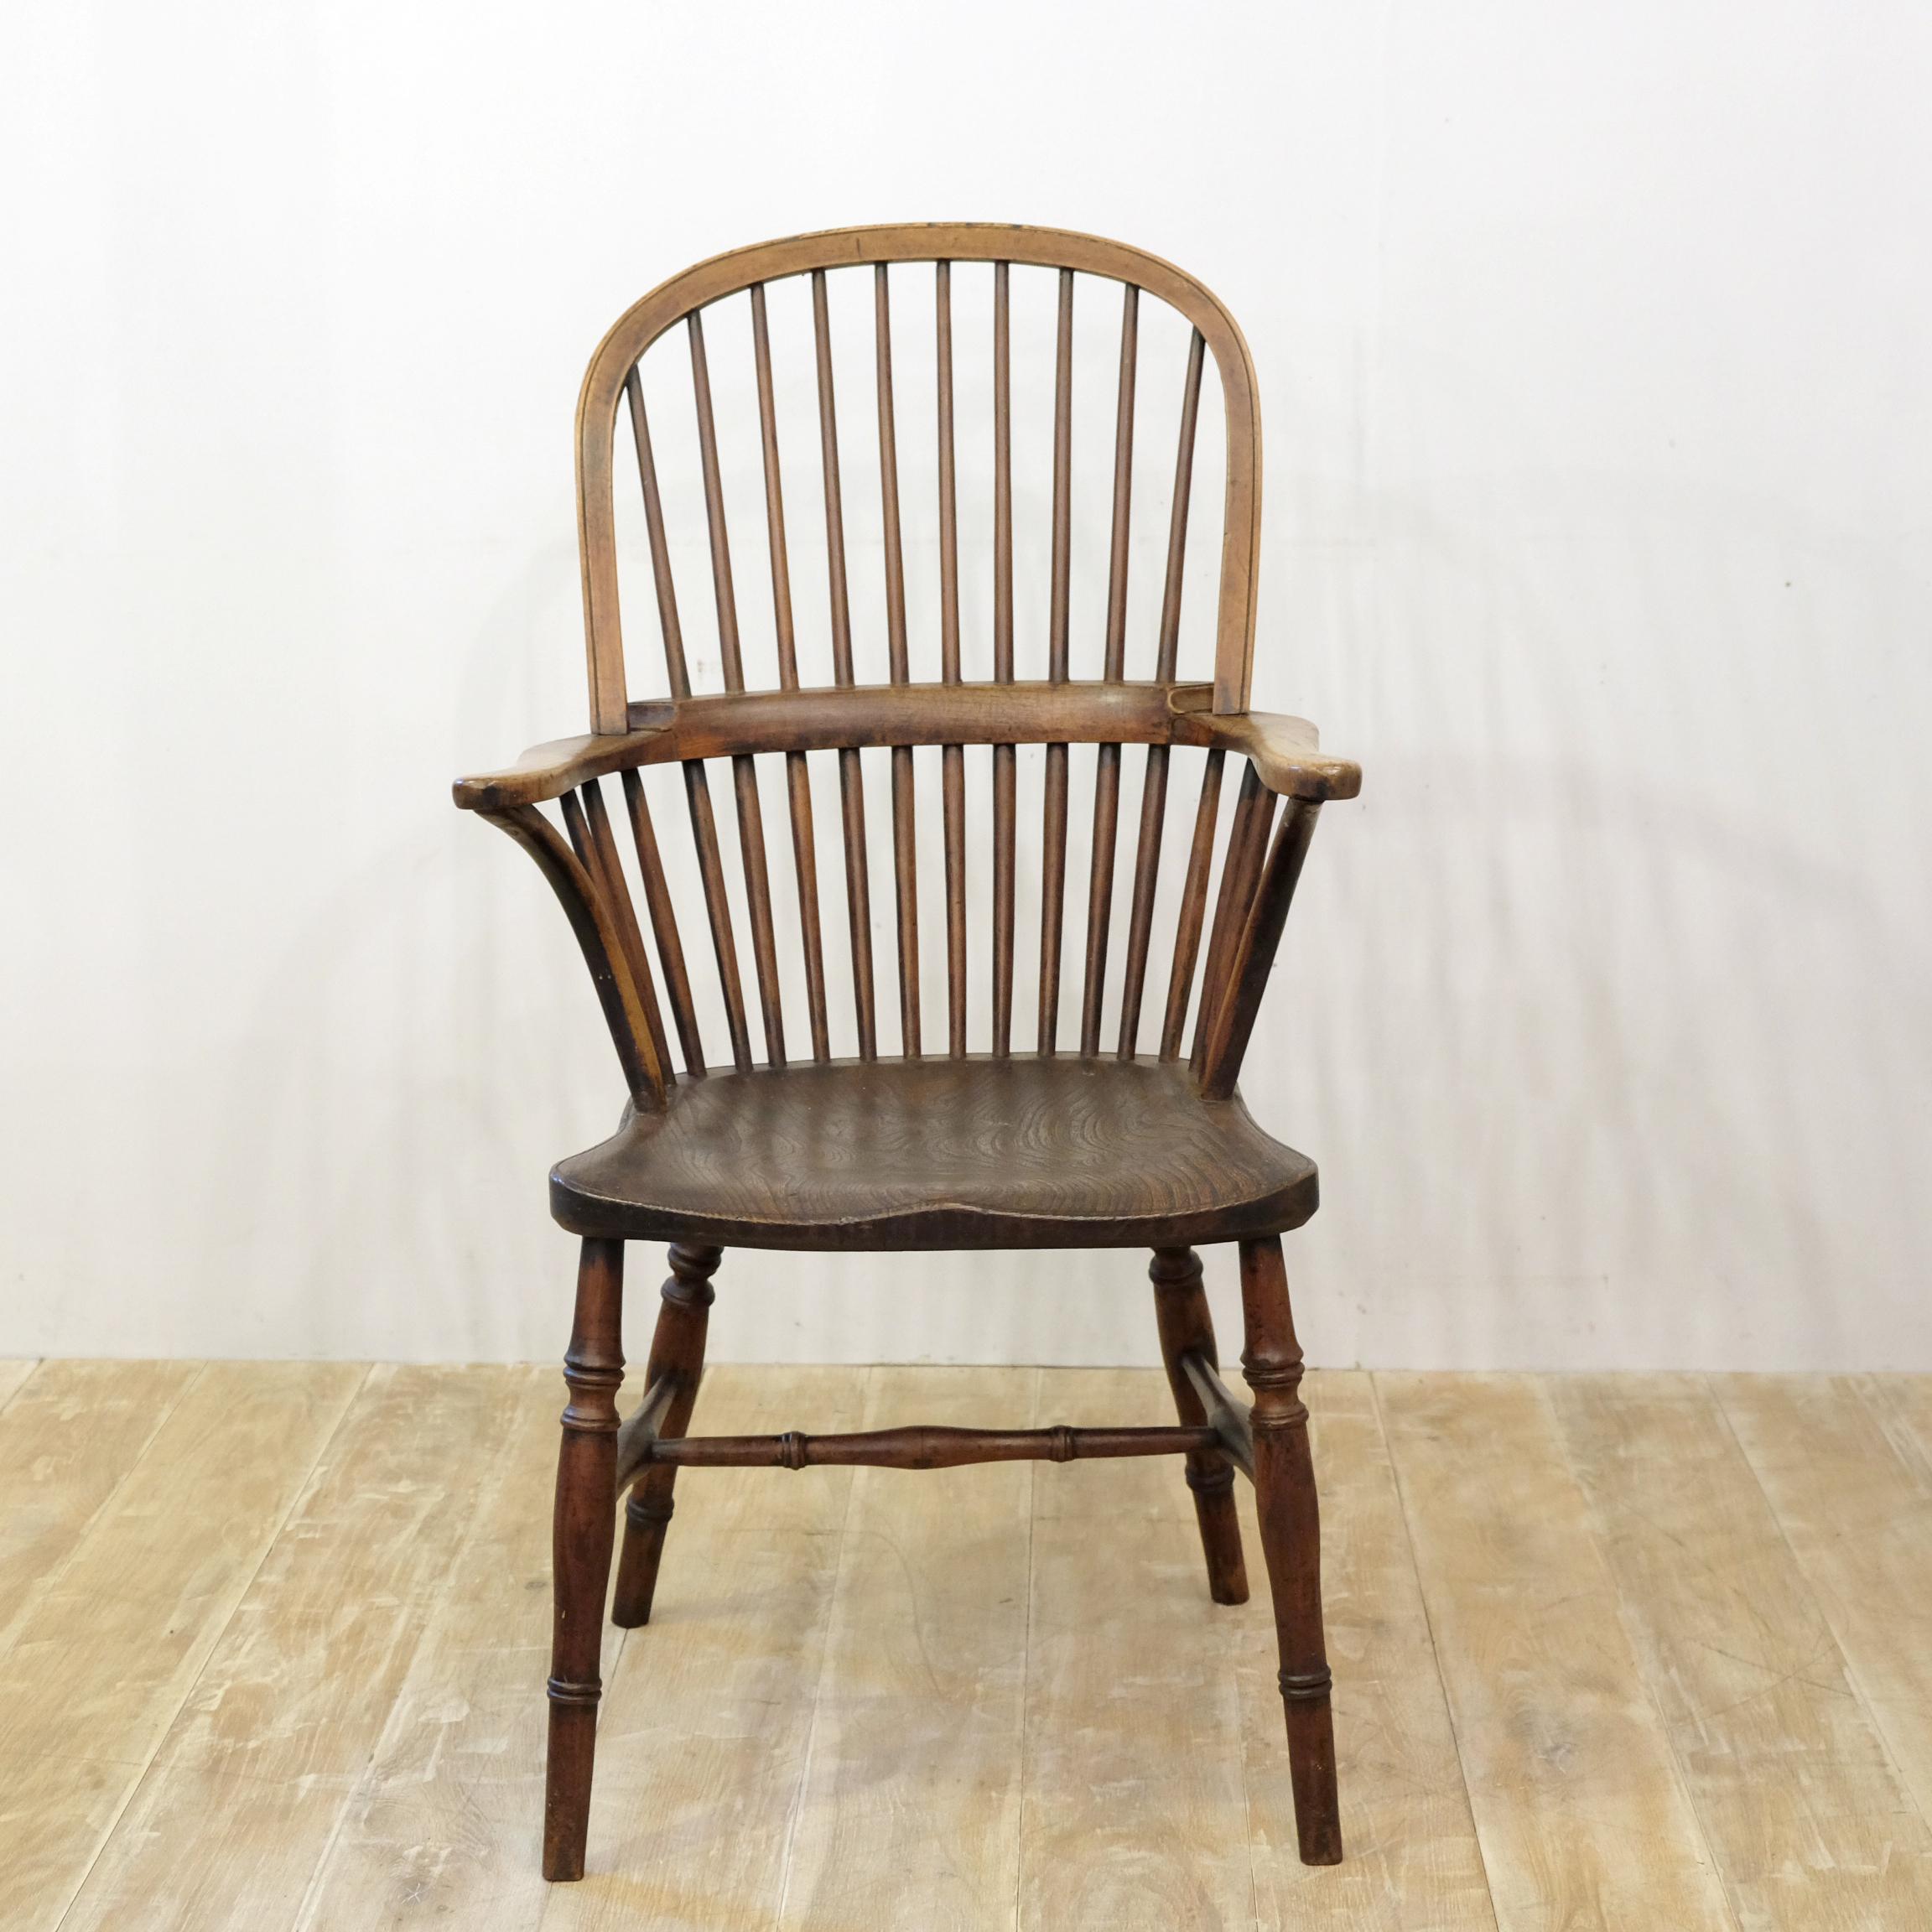 Country Late 19th Century English Thames Valley Windsor Chair in Ash and Elm